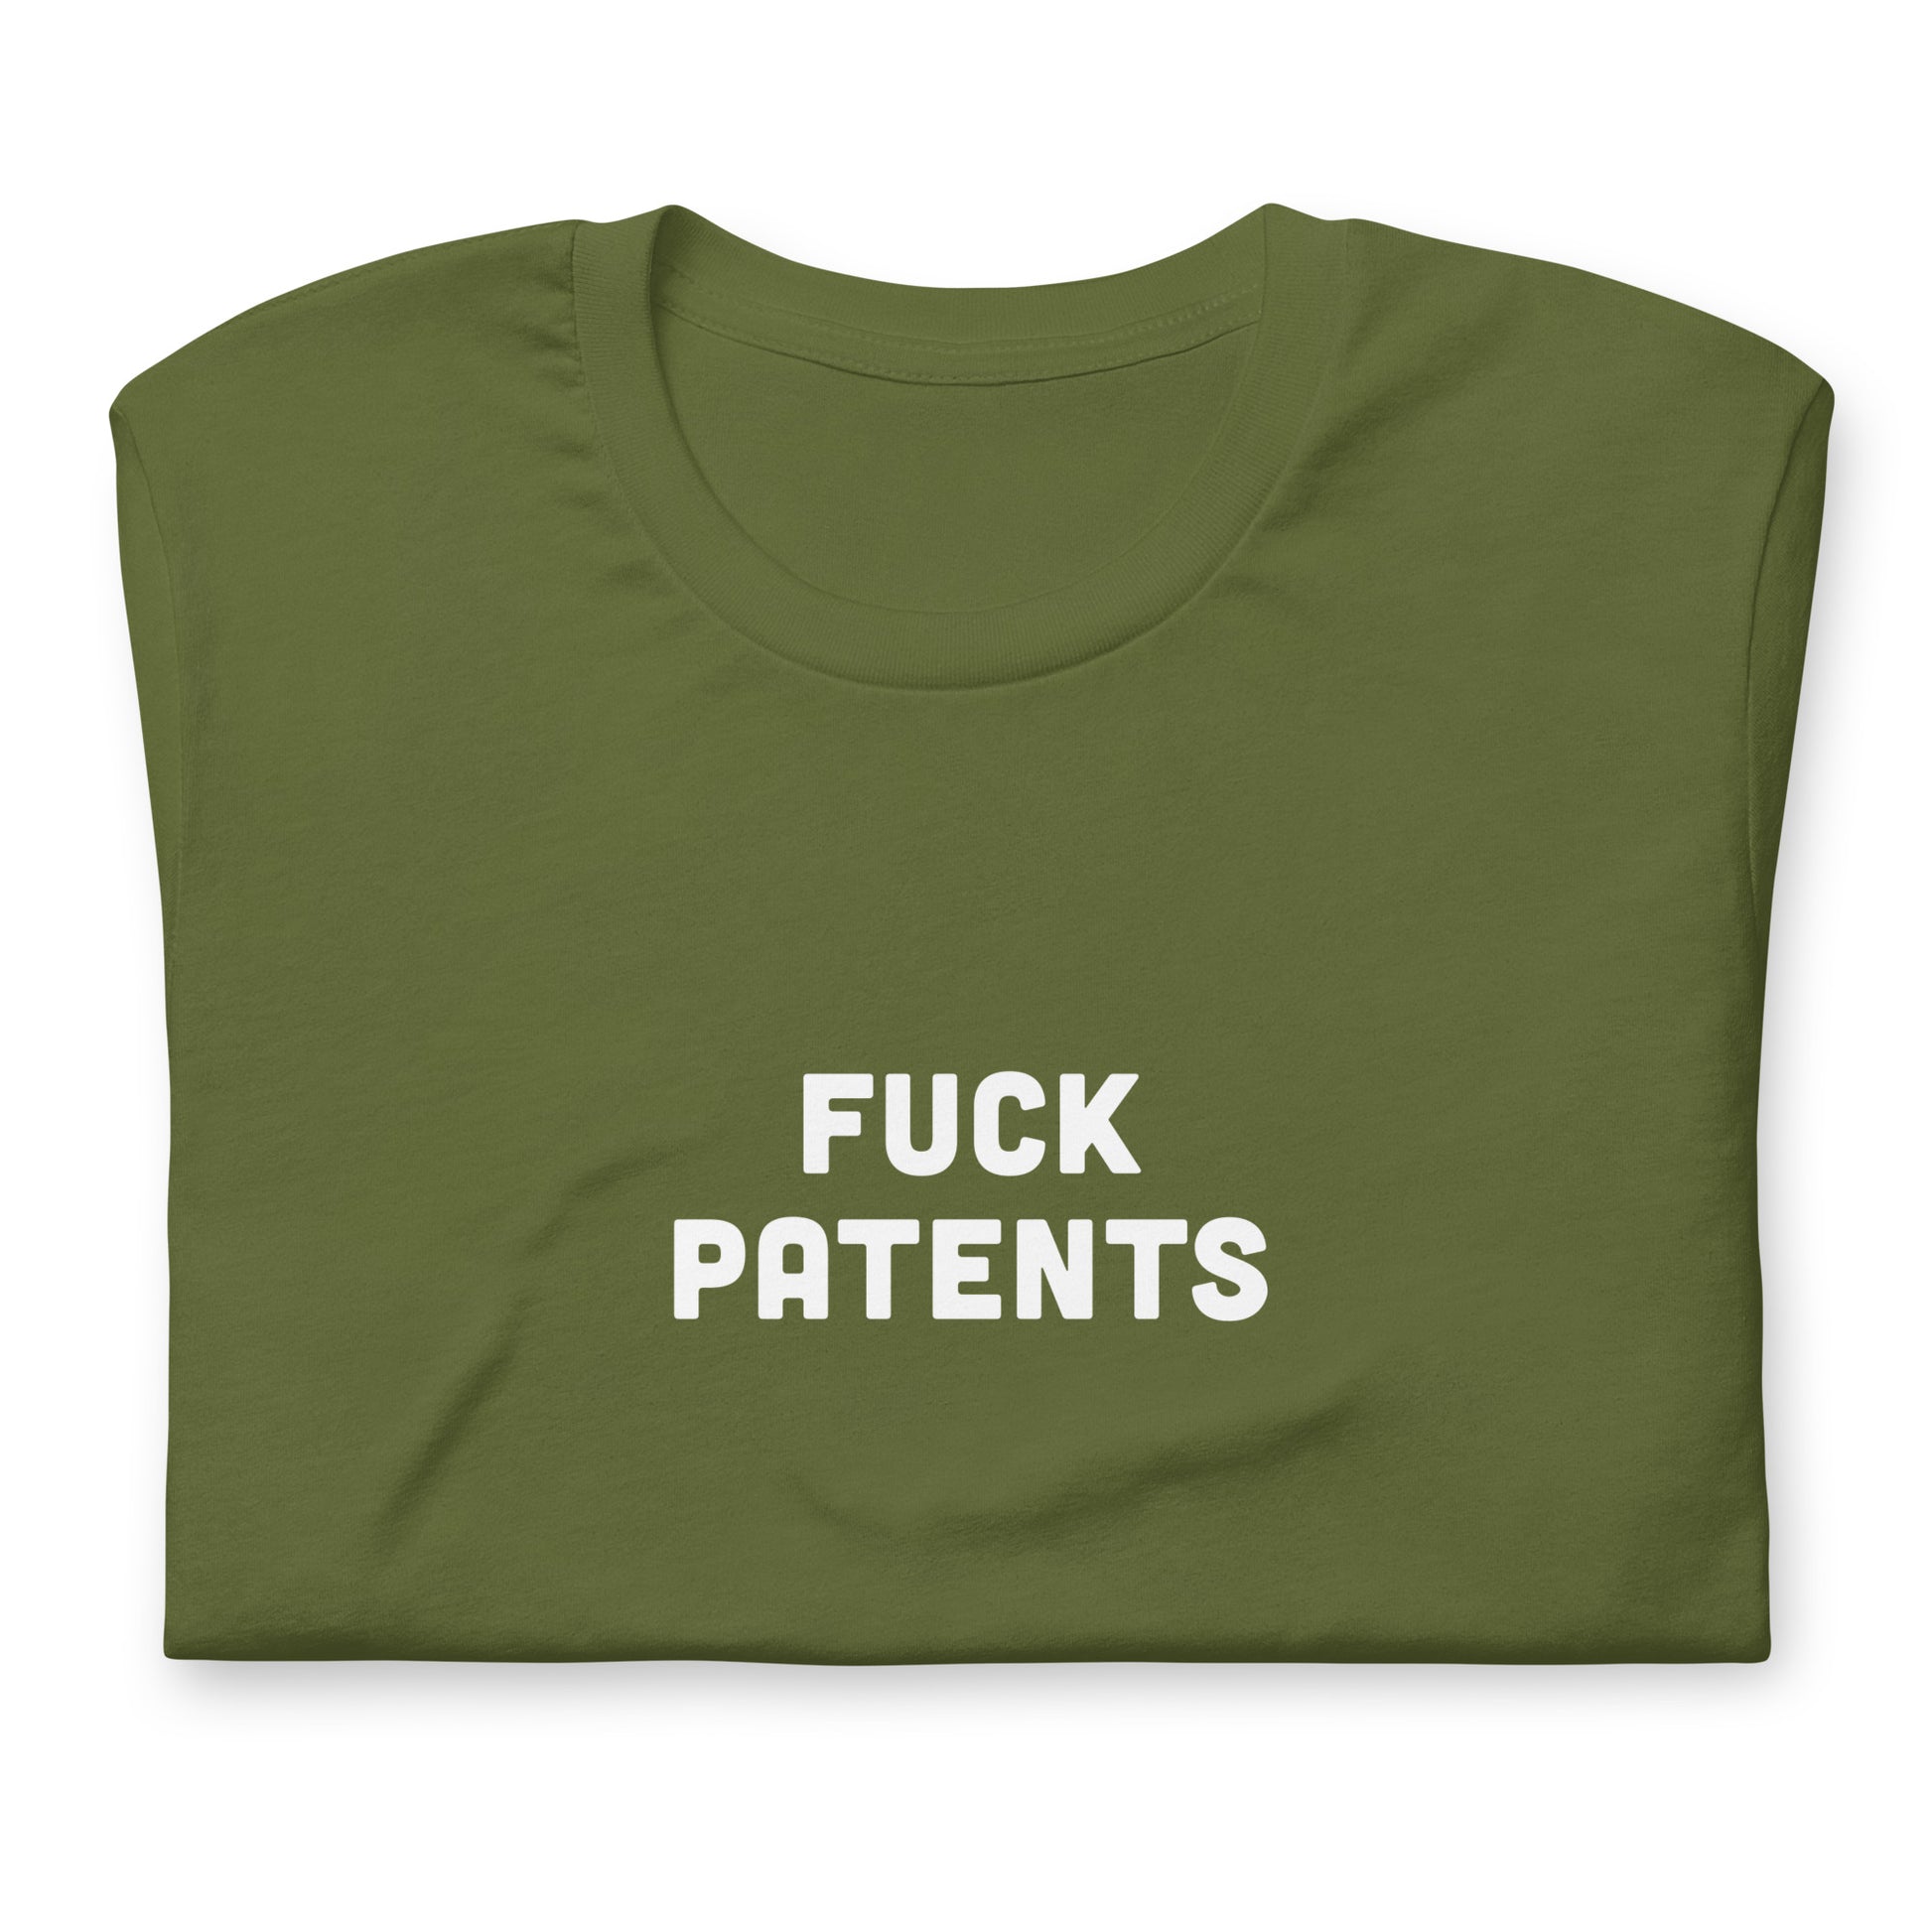 Fuck Patents T-Shirt Size S Color Navy